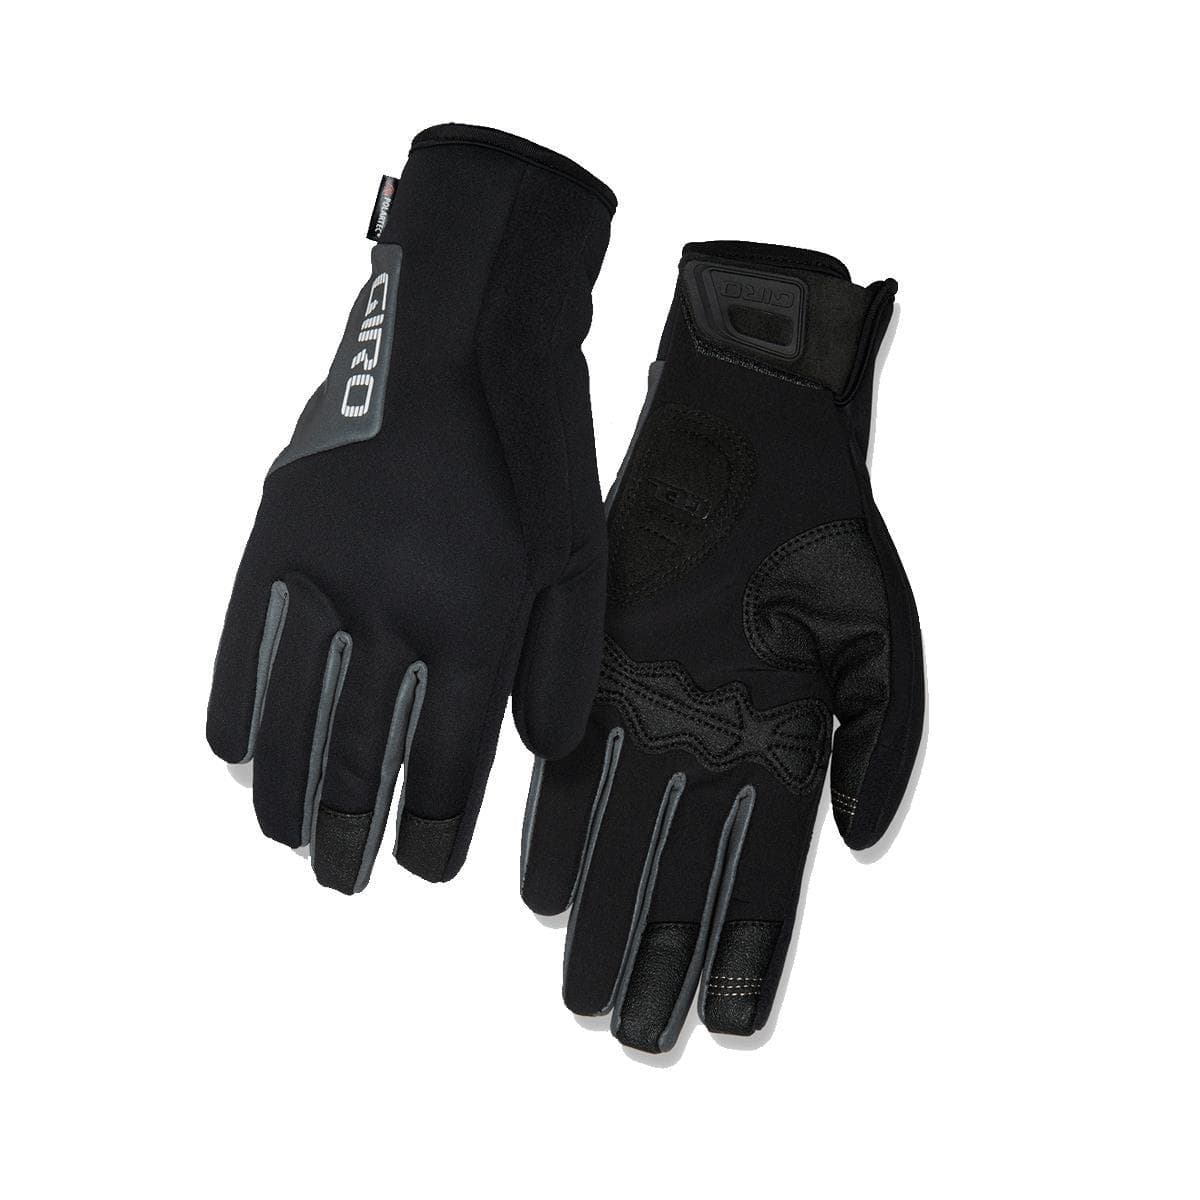 Giro Wm Candela 2.0 Water Resistant Insulated Windbloc Cycling Gloves 2017: Black L